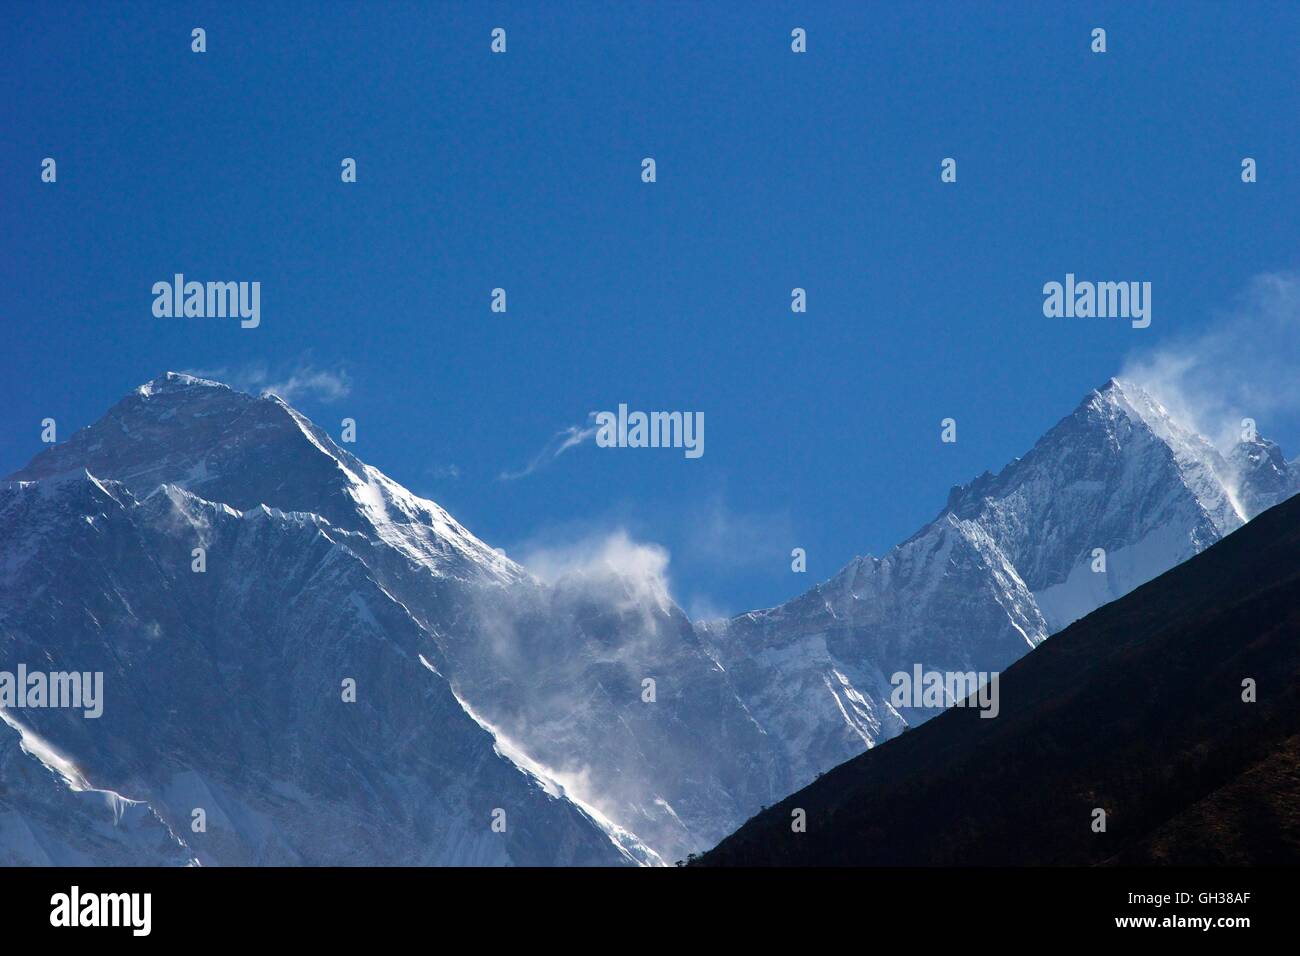 View to Mt Everest and Lhotse from the trail near Namche Bazar, Nepal, Asia Stock Photo